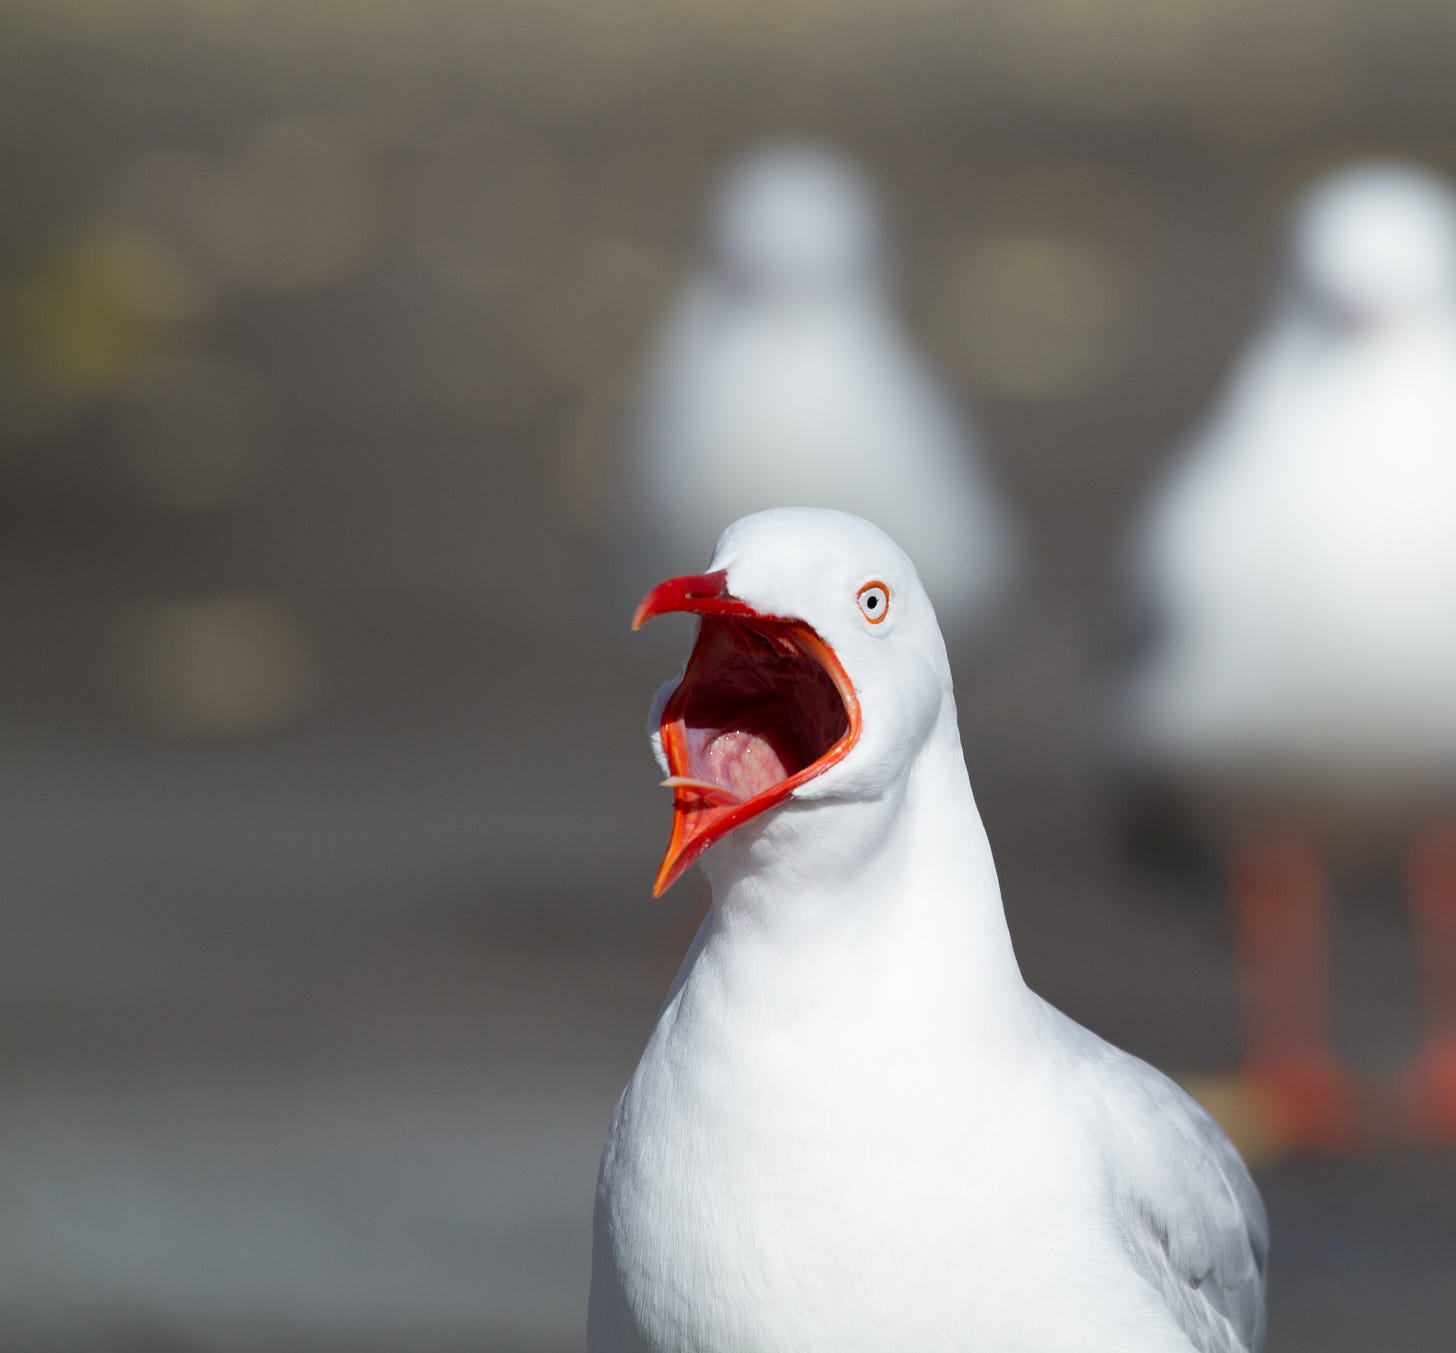 A seagull, mid-caw, against a blurred outdoor background